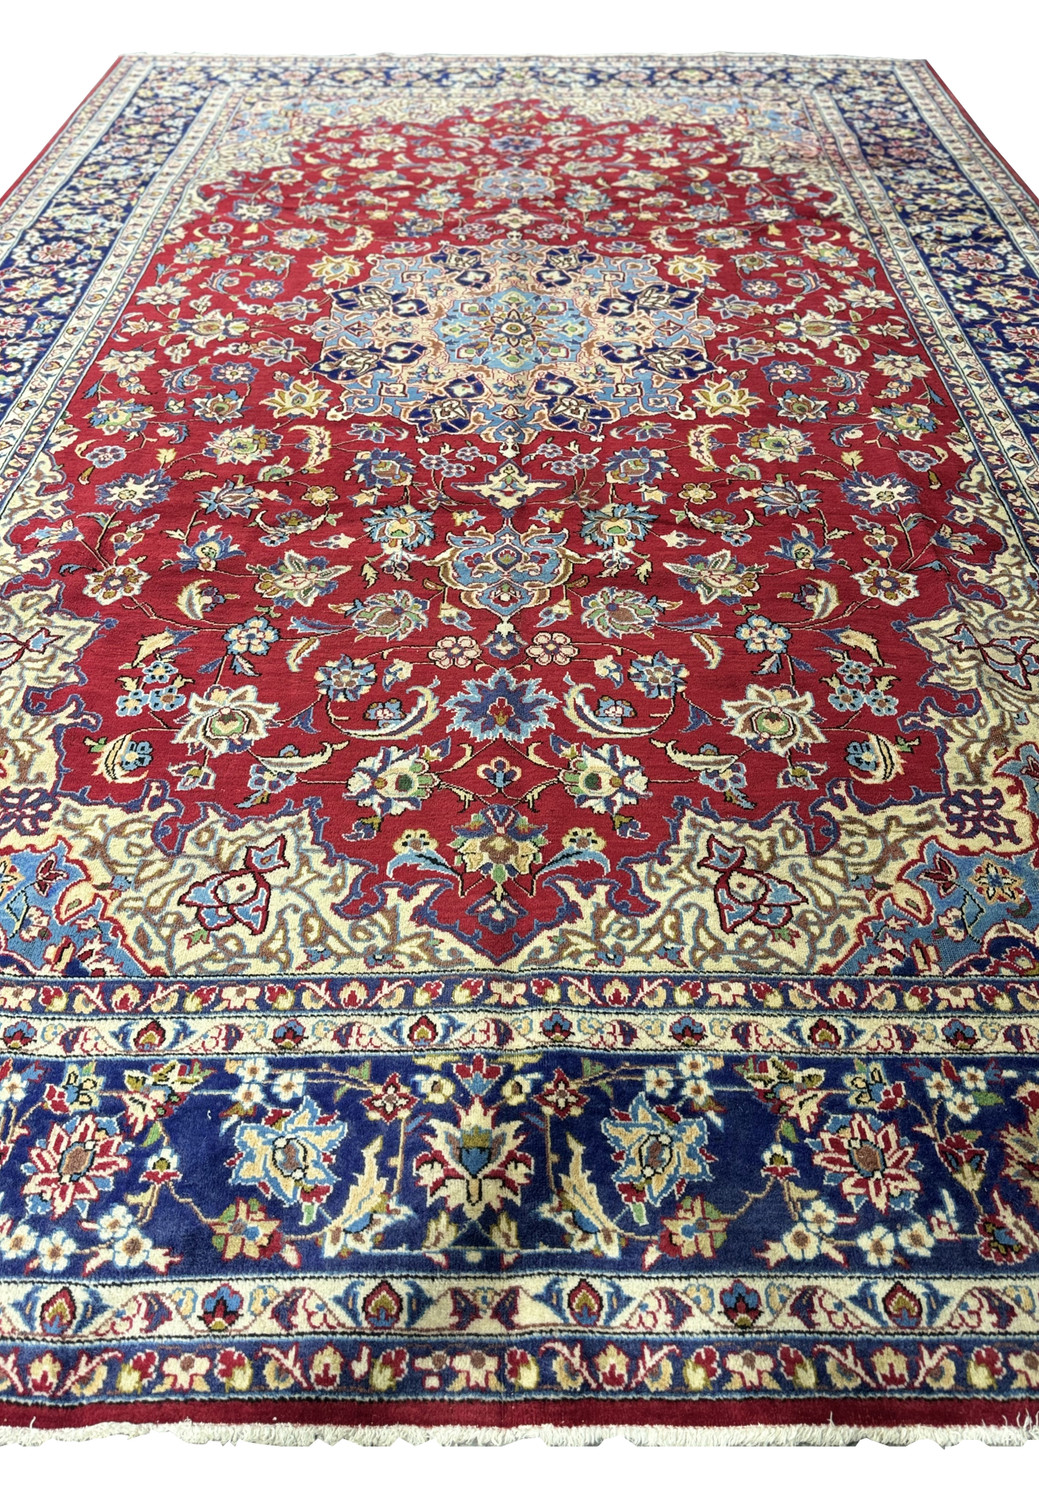 A detailed section of a 10 x 15'6" Persian Isfahan rug, showcasing rich crimson and navy blue with intricate floral and geometric patterns highlighted by cream and indigo accents